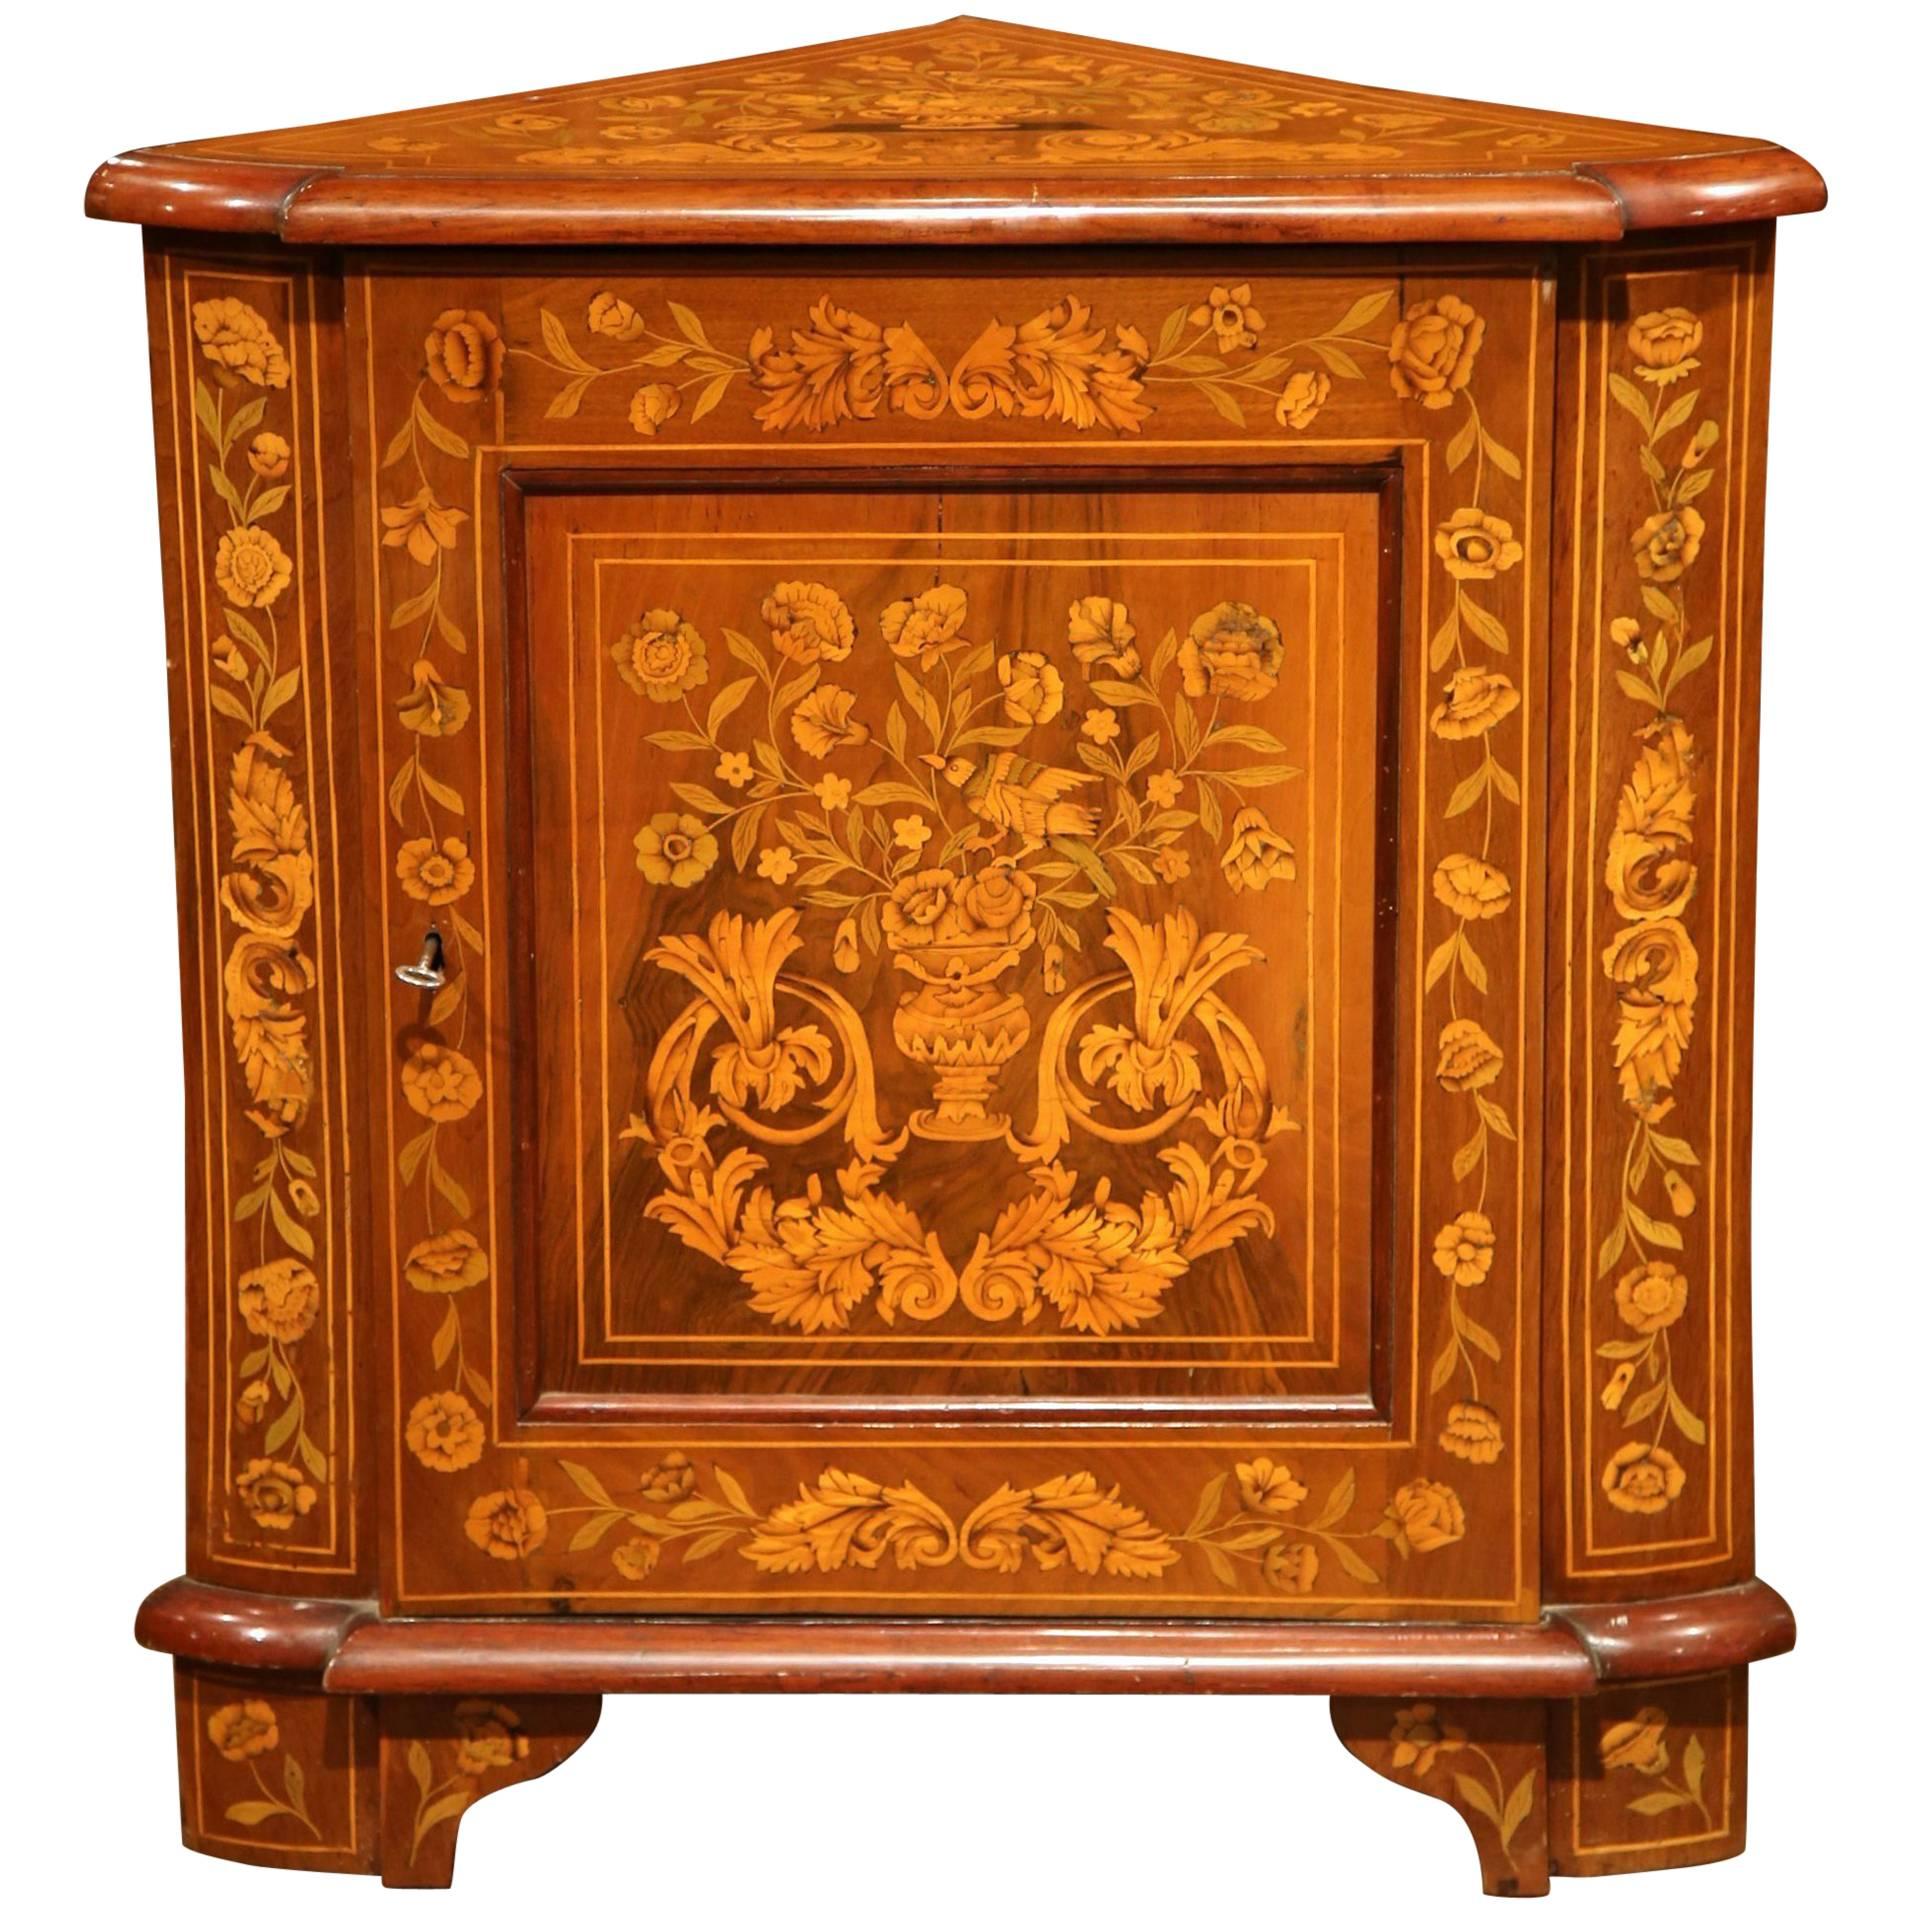 Early 19th Century Dutch Walnut Marquetry Corner Cabinet with Inlay Decor